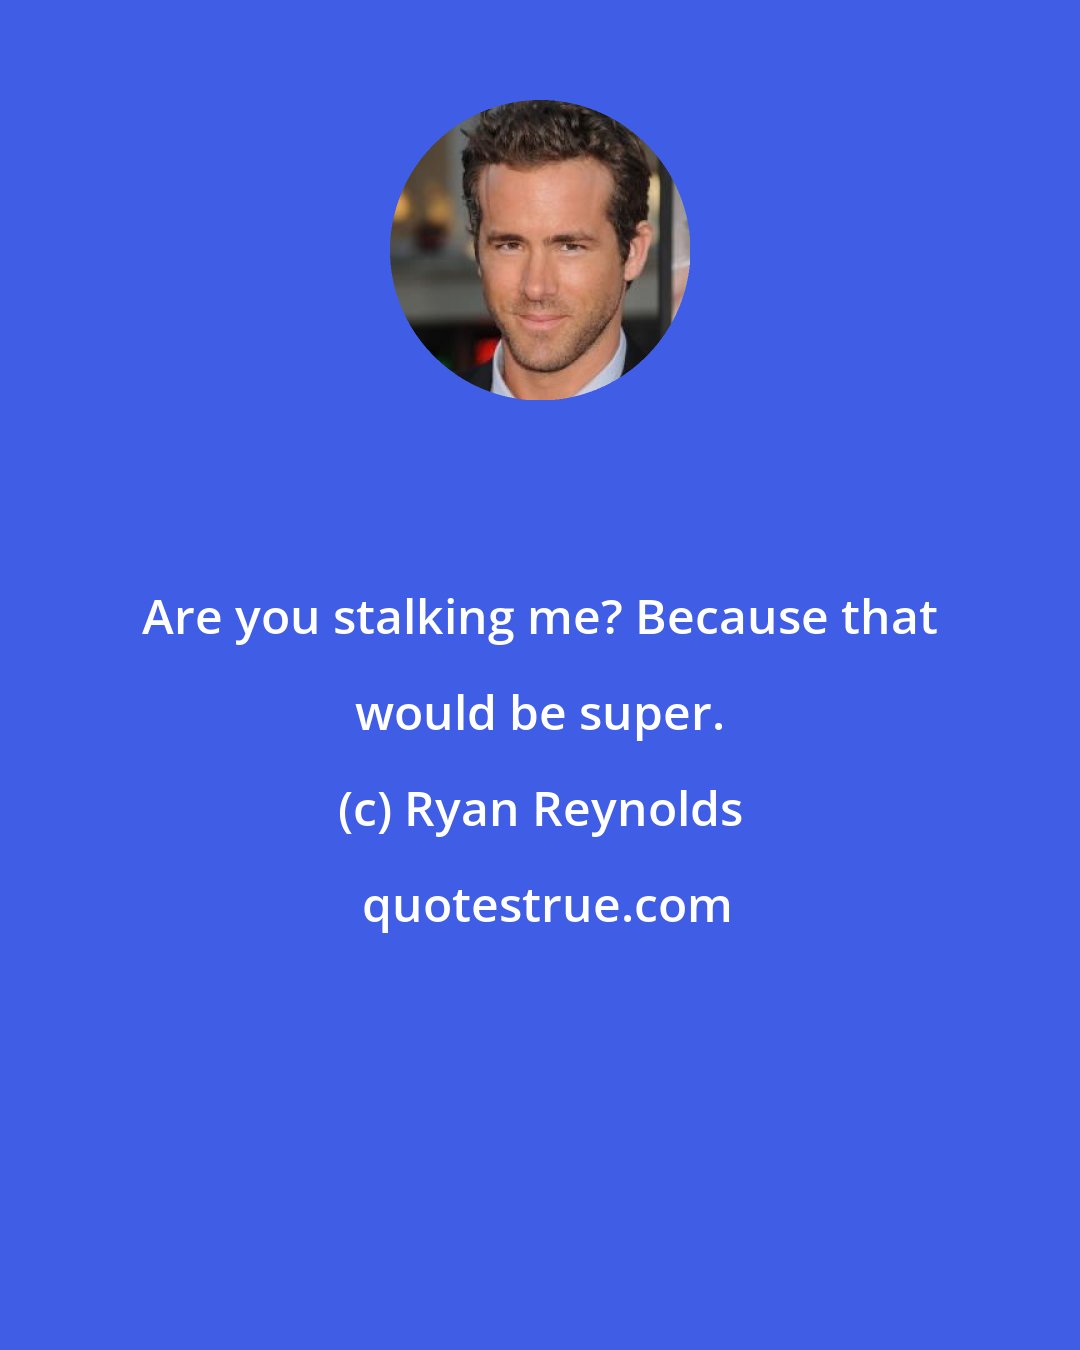 Ryan Reynolds: Are you stalking me? Because that would be super.